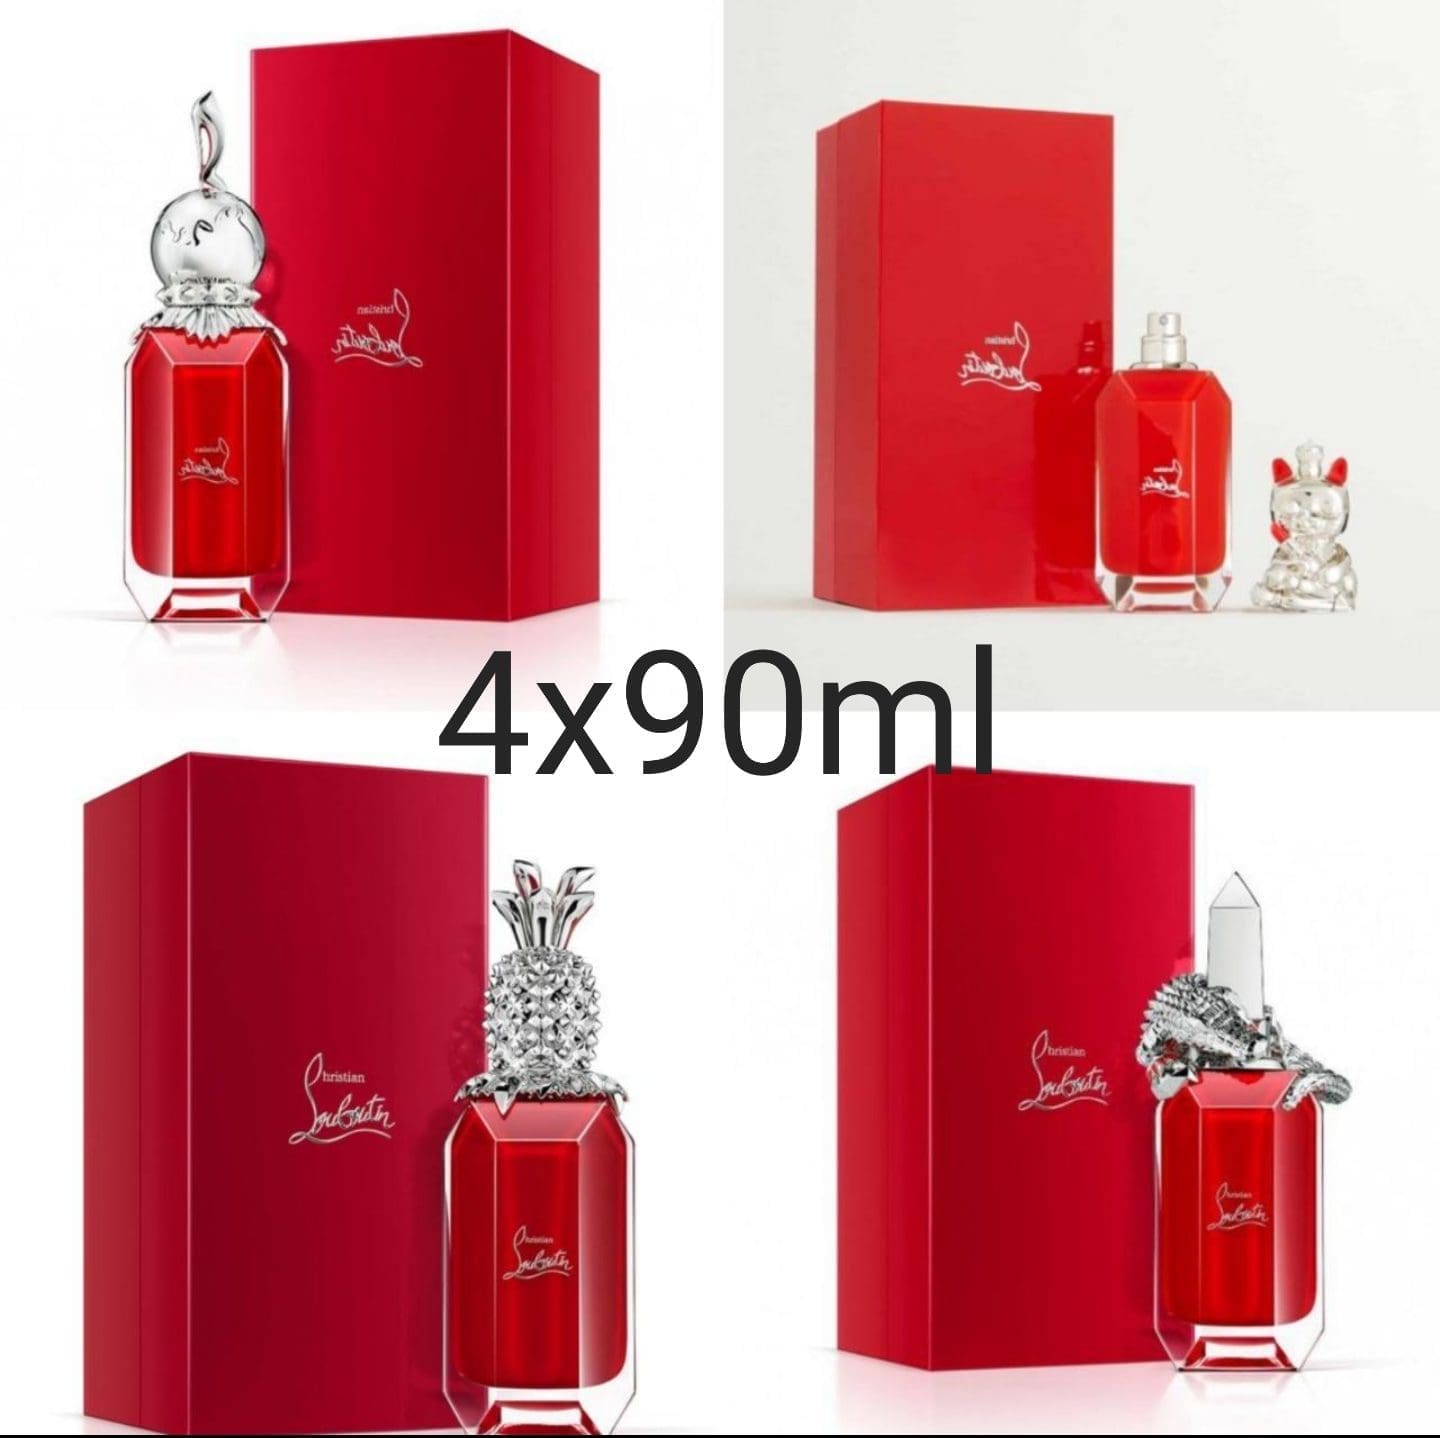 8000 Christian Louboutin 4x90ml 3 bags only